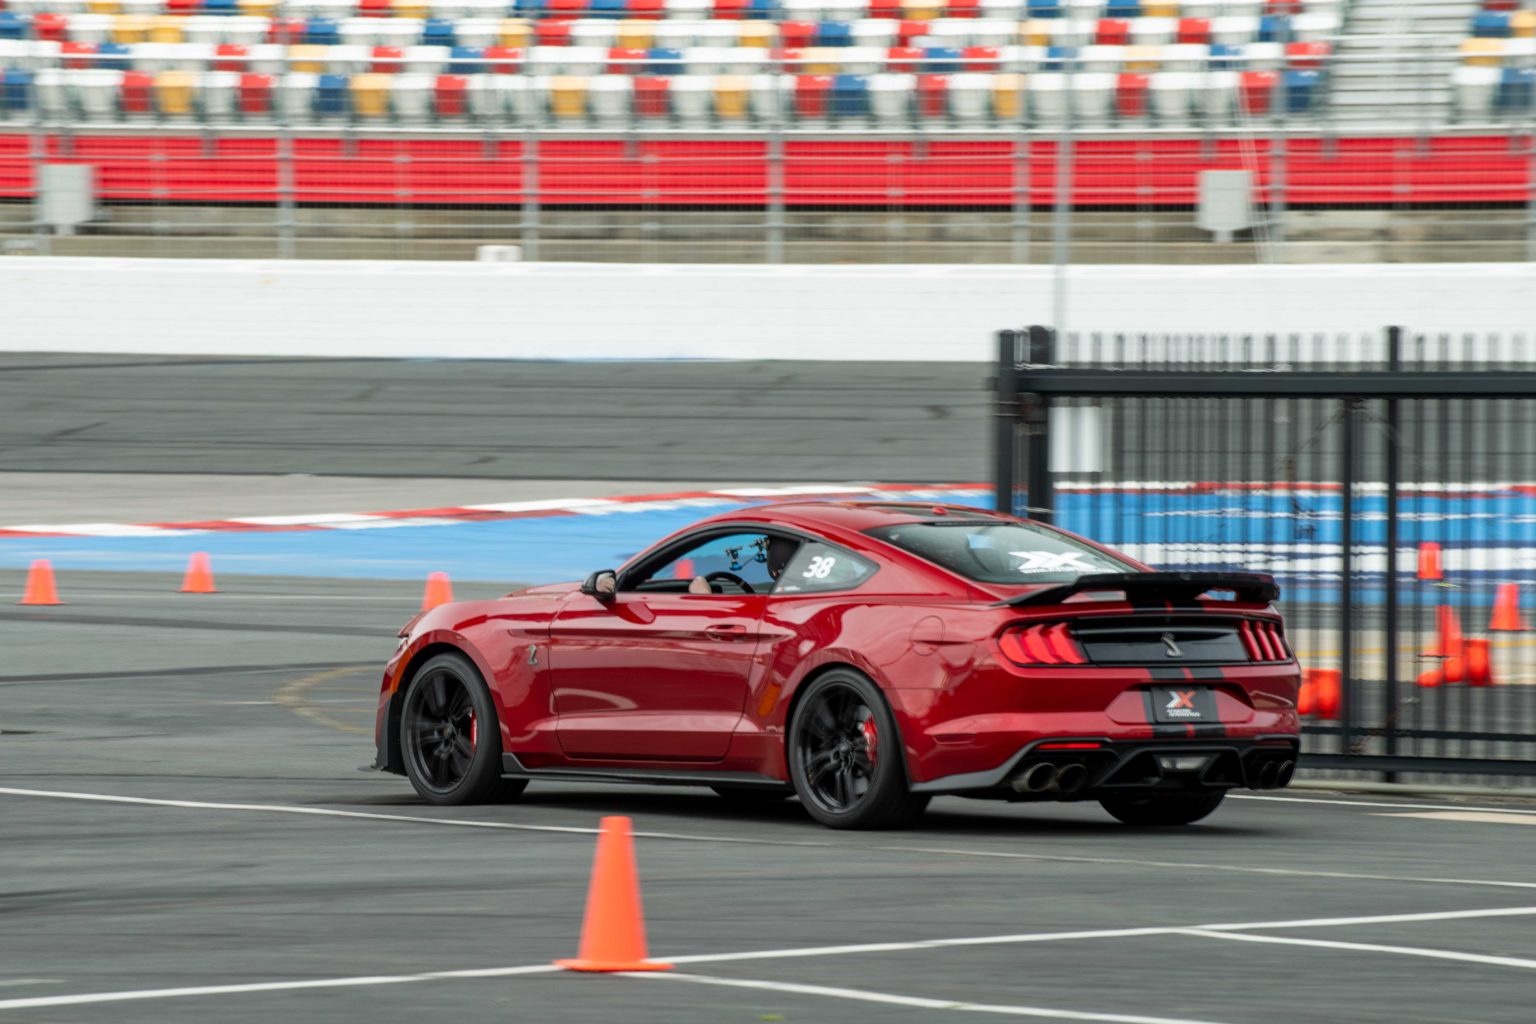 Xtreme Xperience's Mustang Shelby GT500 in Pit Lane at Utah Motorsports Campus